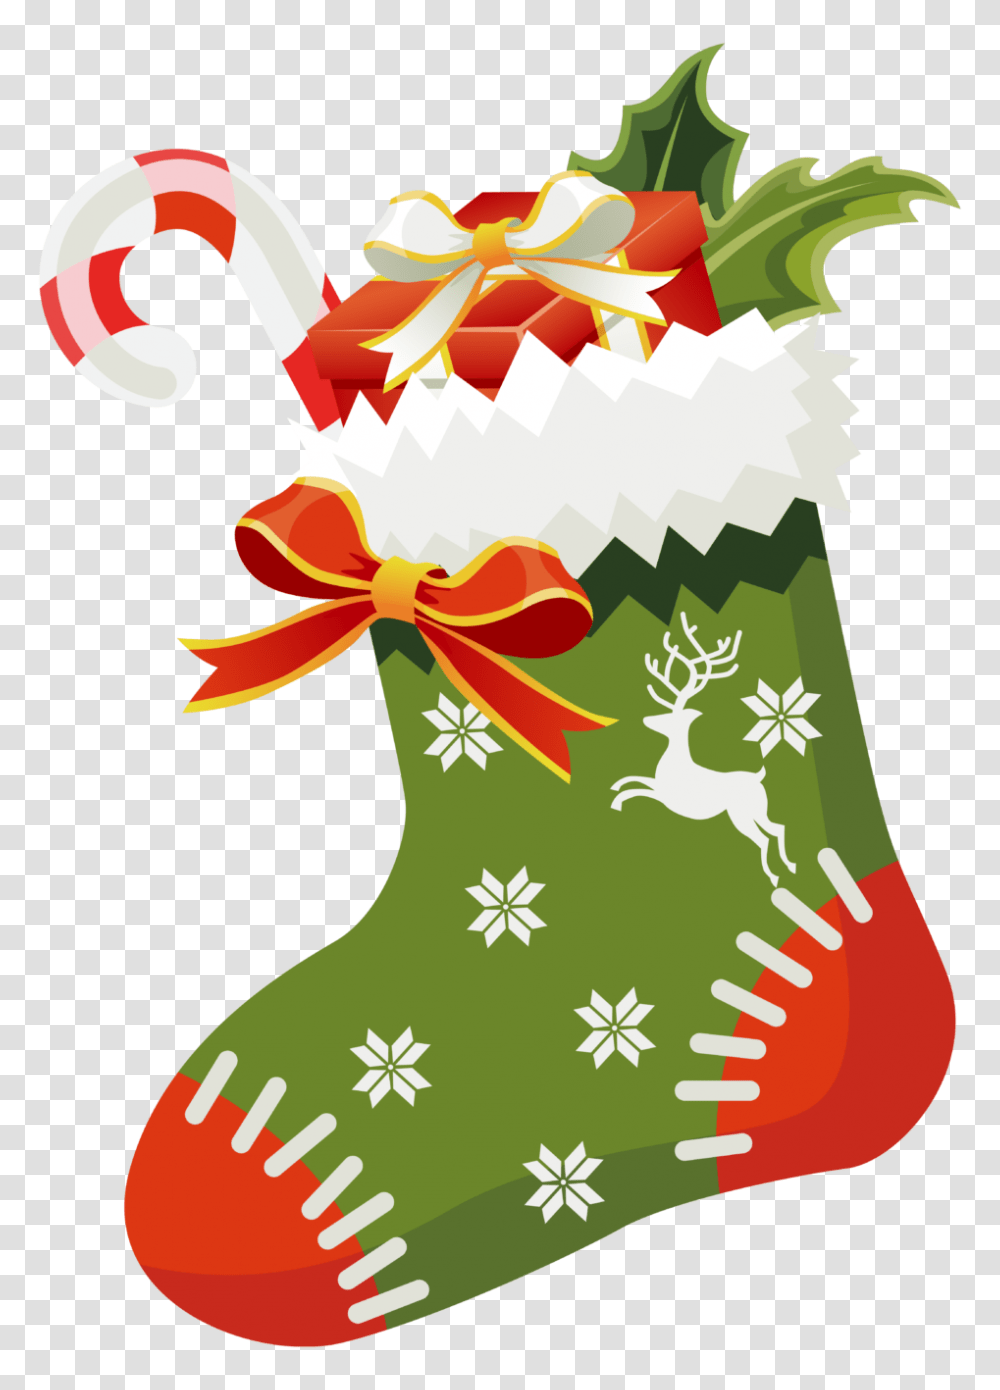 Tremendous Christmas Stocking Clipart Image Inspirations Advent, Gift Transparent Png